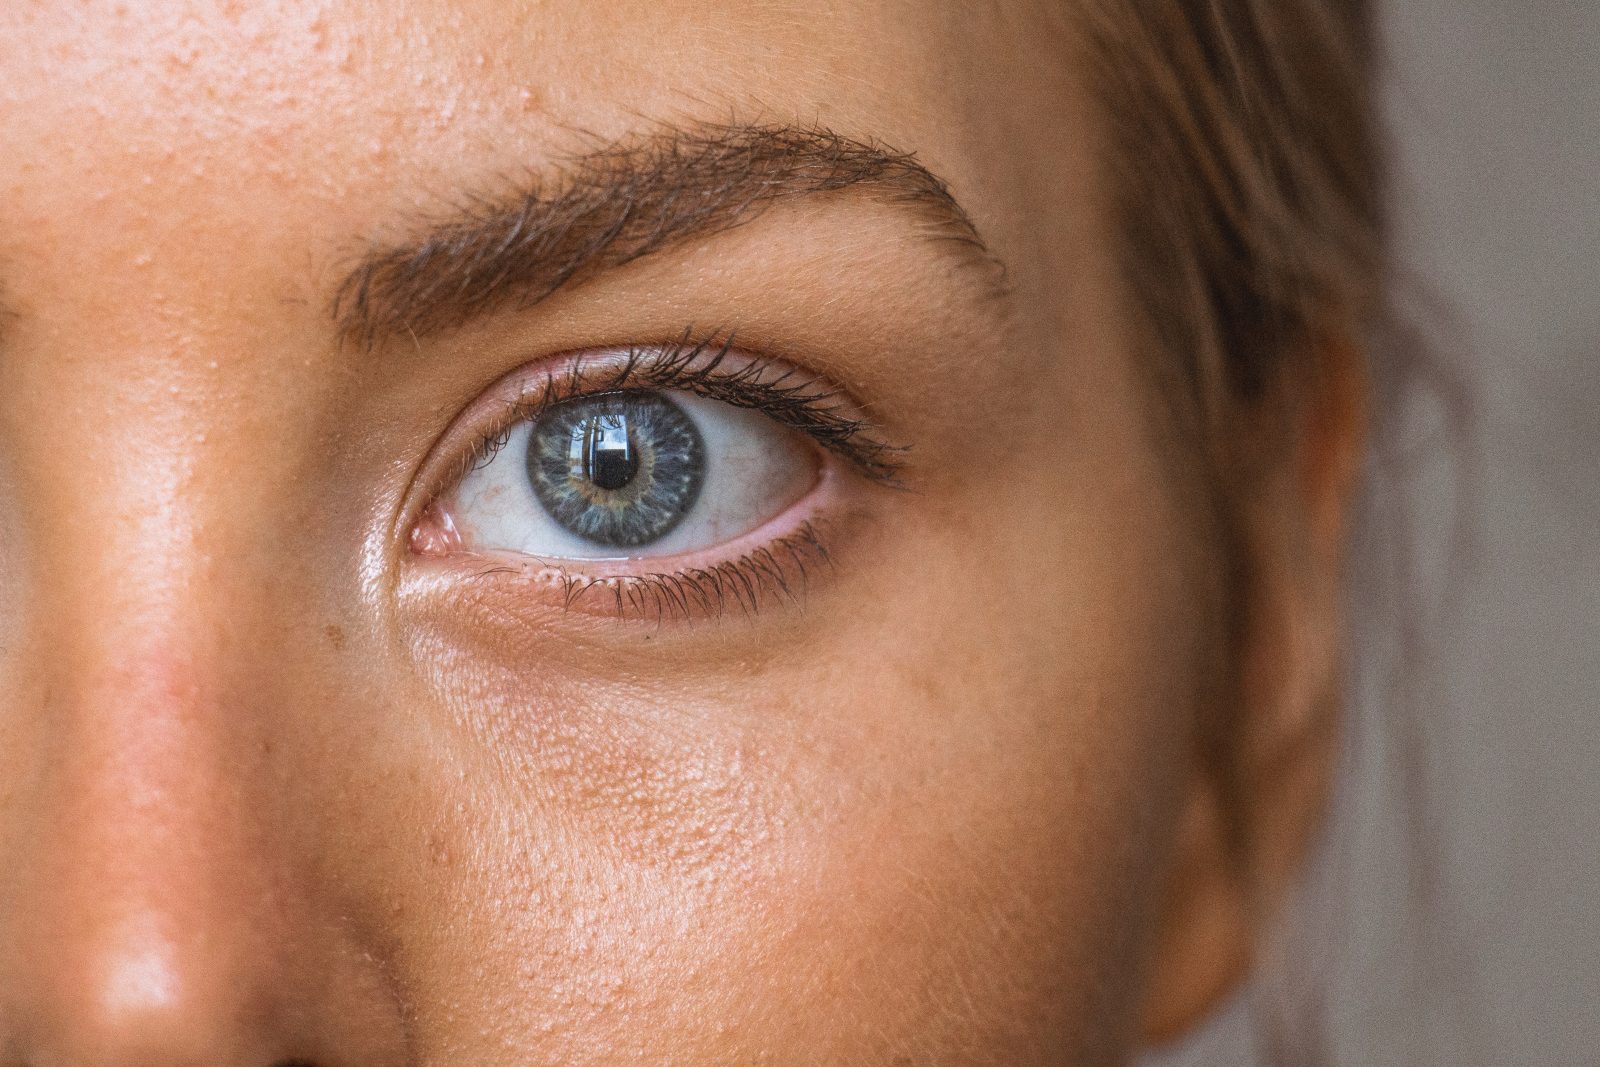 Common causes of eye irritation and tips to prevent it